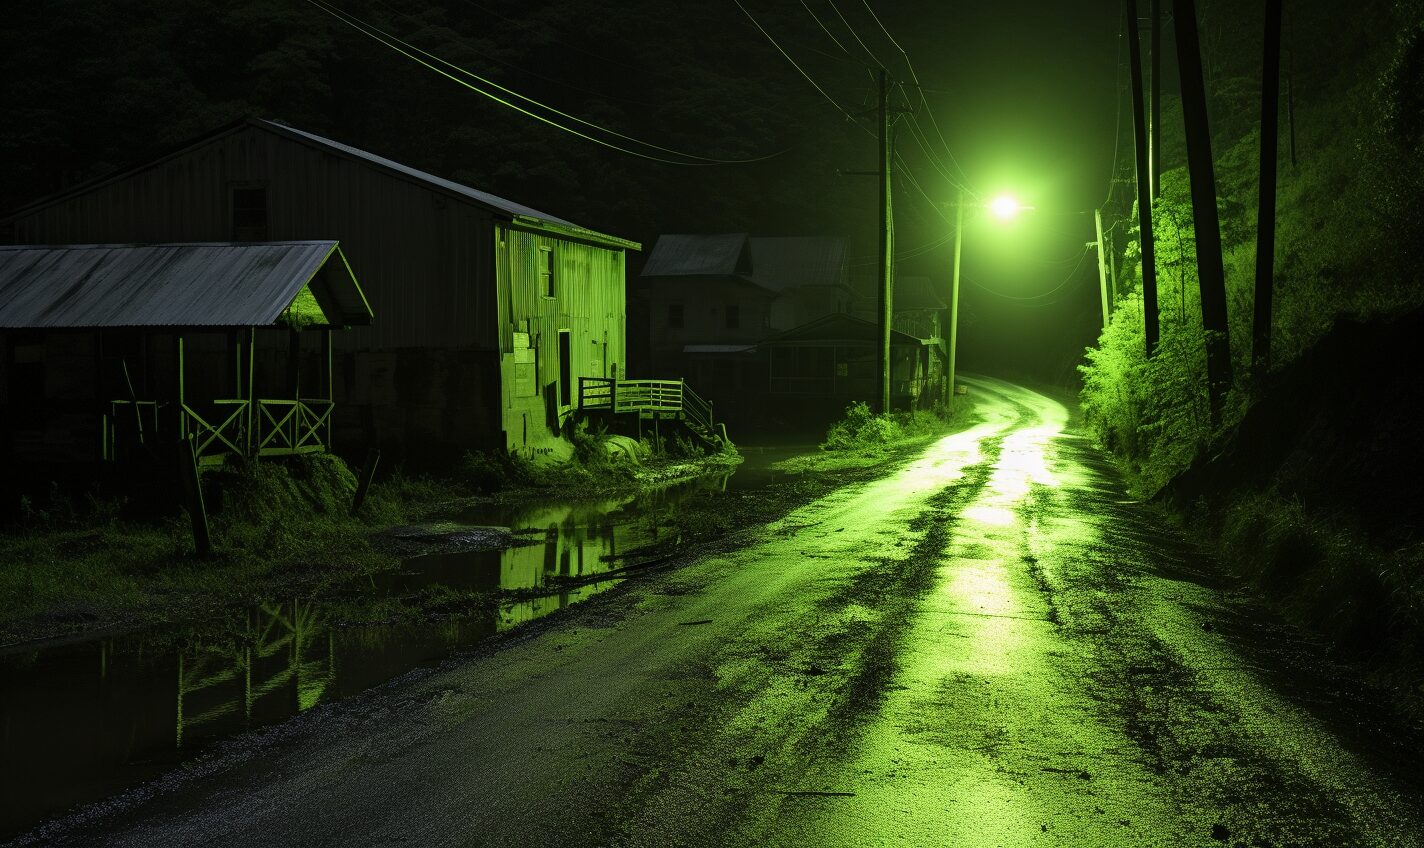 huntington, west virginia in a black and neon green glow